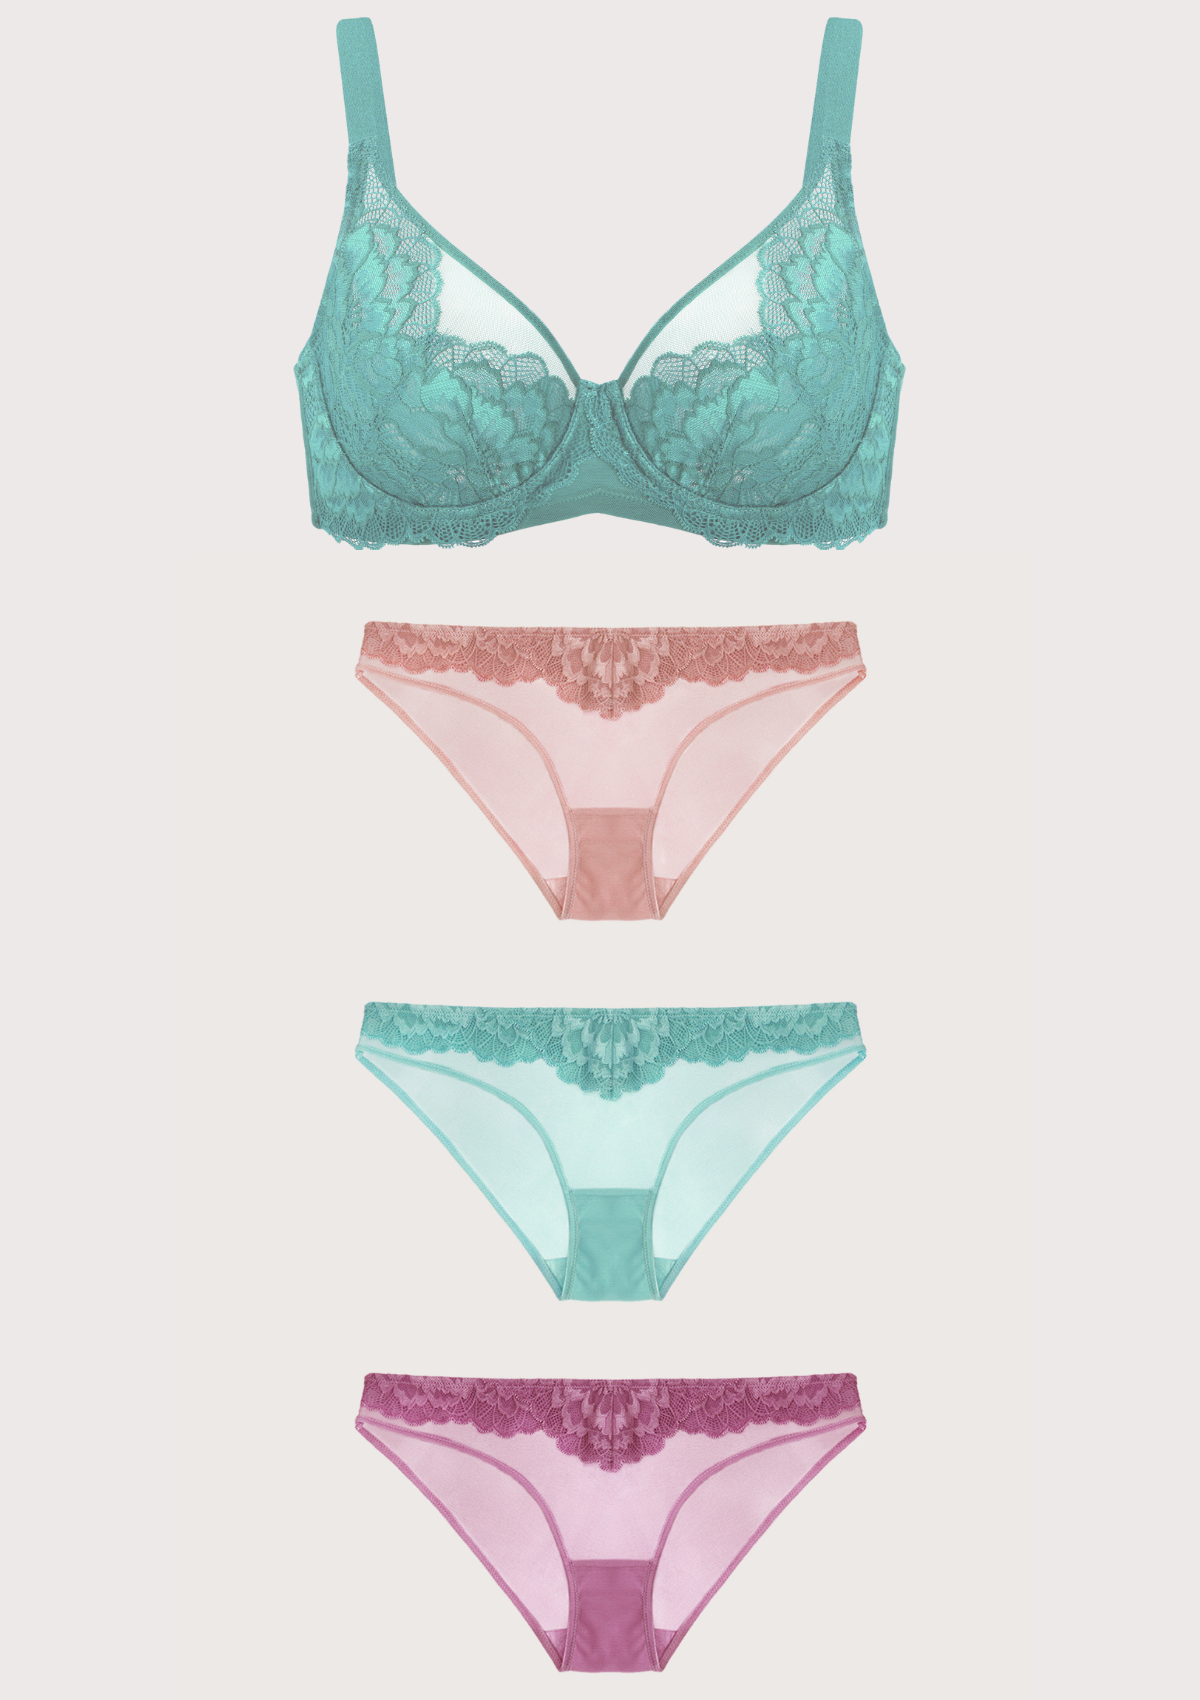 HSIA Paeonia Lace Full Coverage Underwire Non-Padded Uplifting Bra - Teal / 40 / DD/E